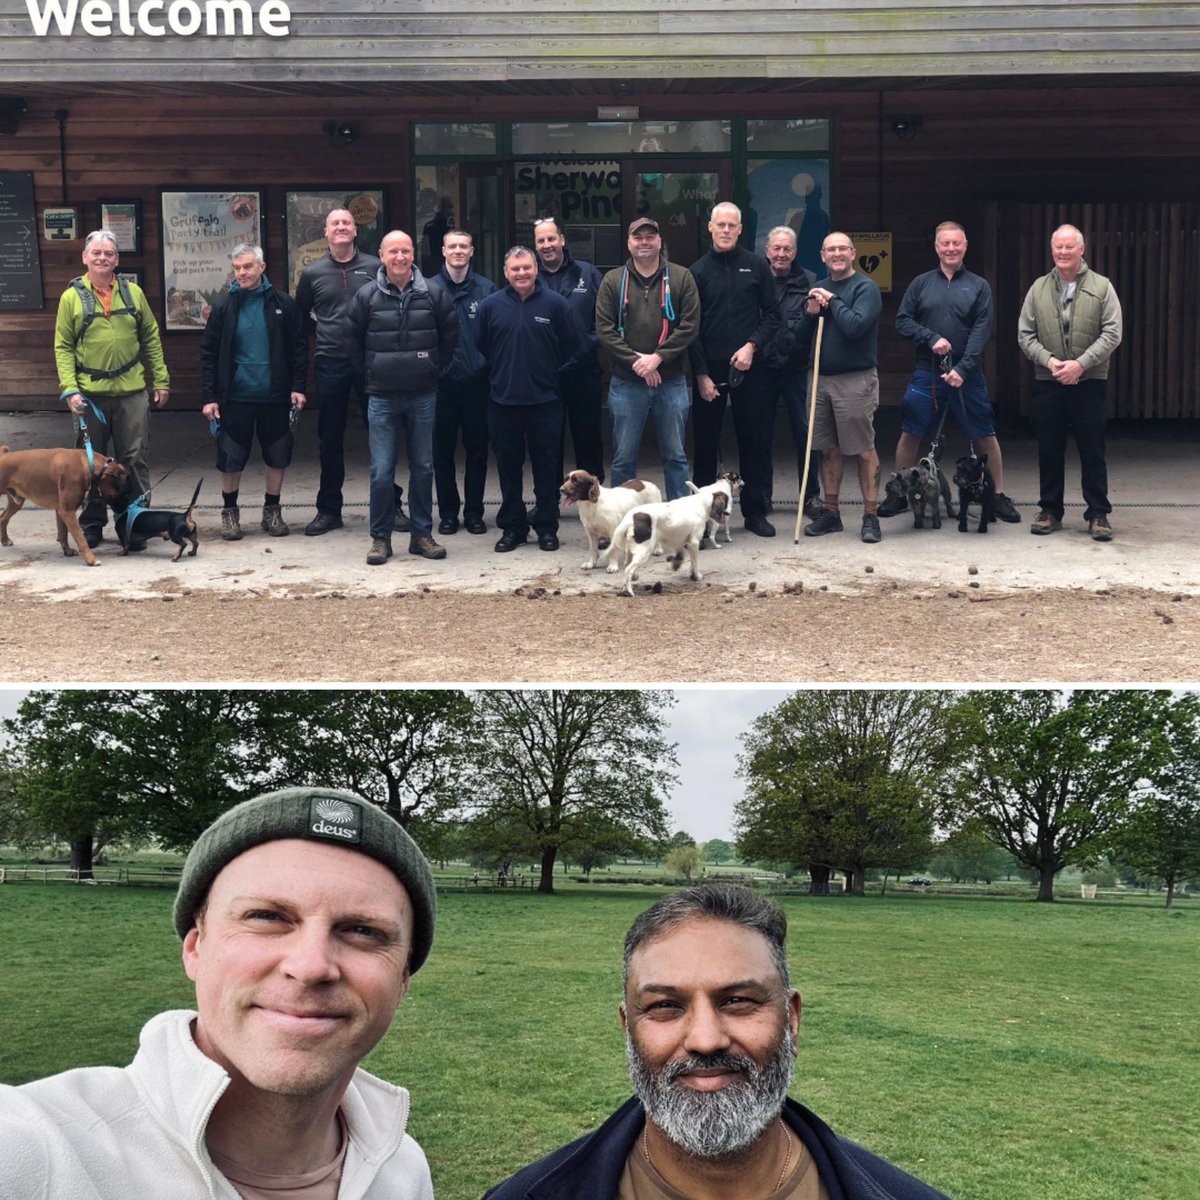 A great Wednesday walking and talking today in Richmond Park and Nottinghamshire Richmond Park walk will be back next week Nottinghamshire walk will be back in 2 weeks For all our 14 walks check out: Walkandtalk999.co.uk